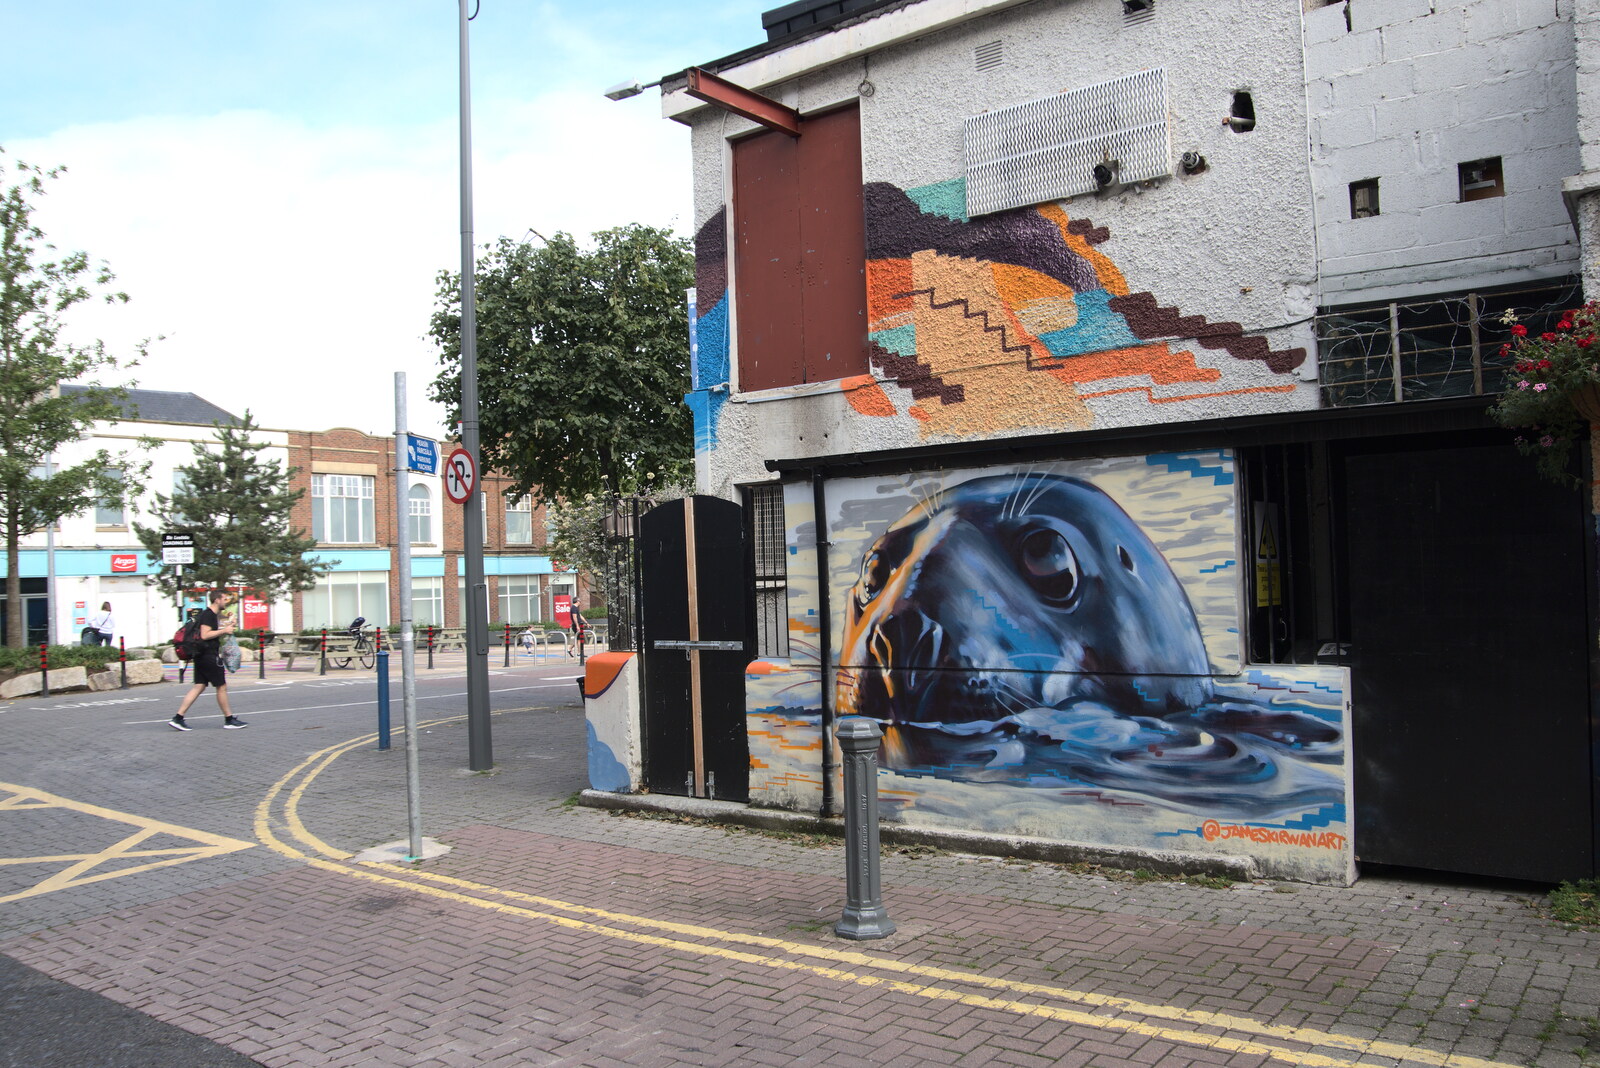 A seal on the wall behind Dunphy's from Manorhamilton and the Street Art of Dún Laoghaire, Ireland - 15th August 2021